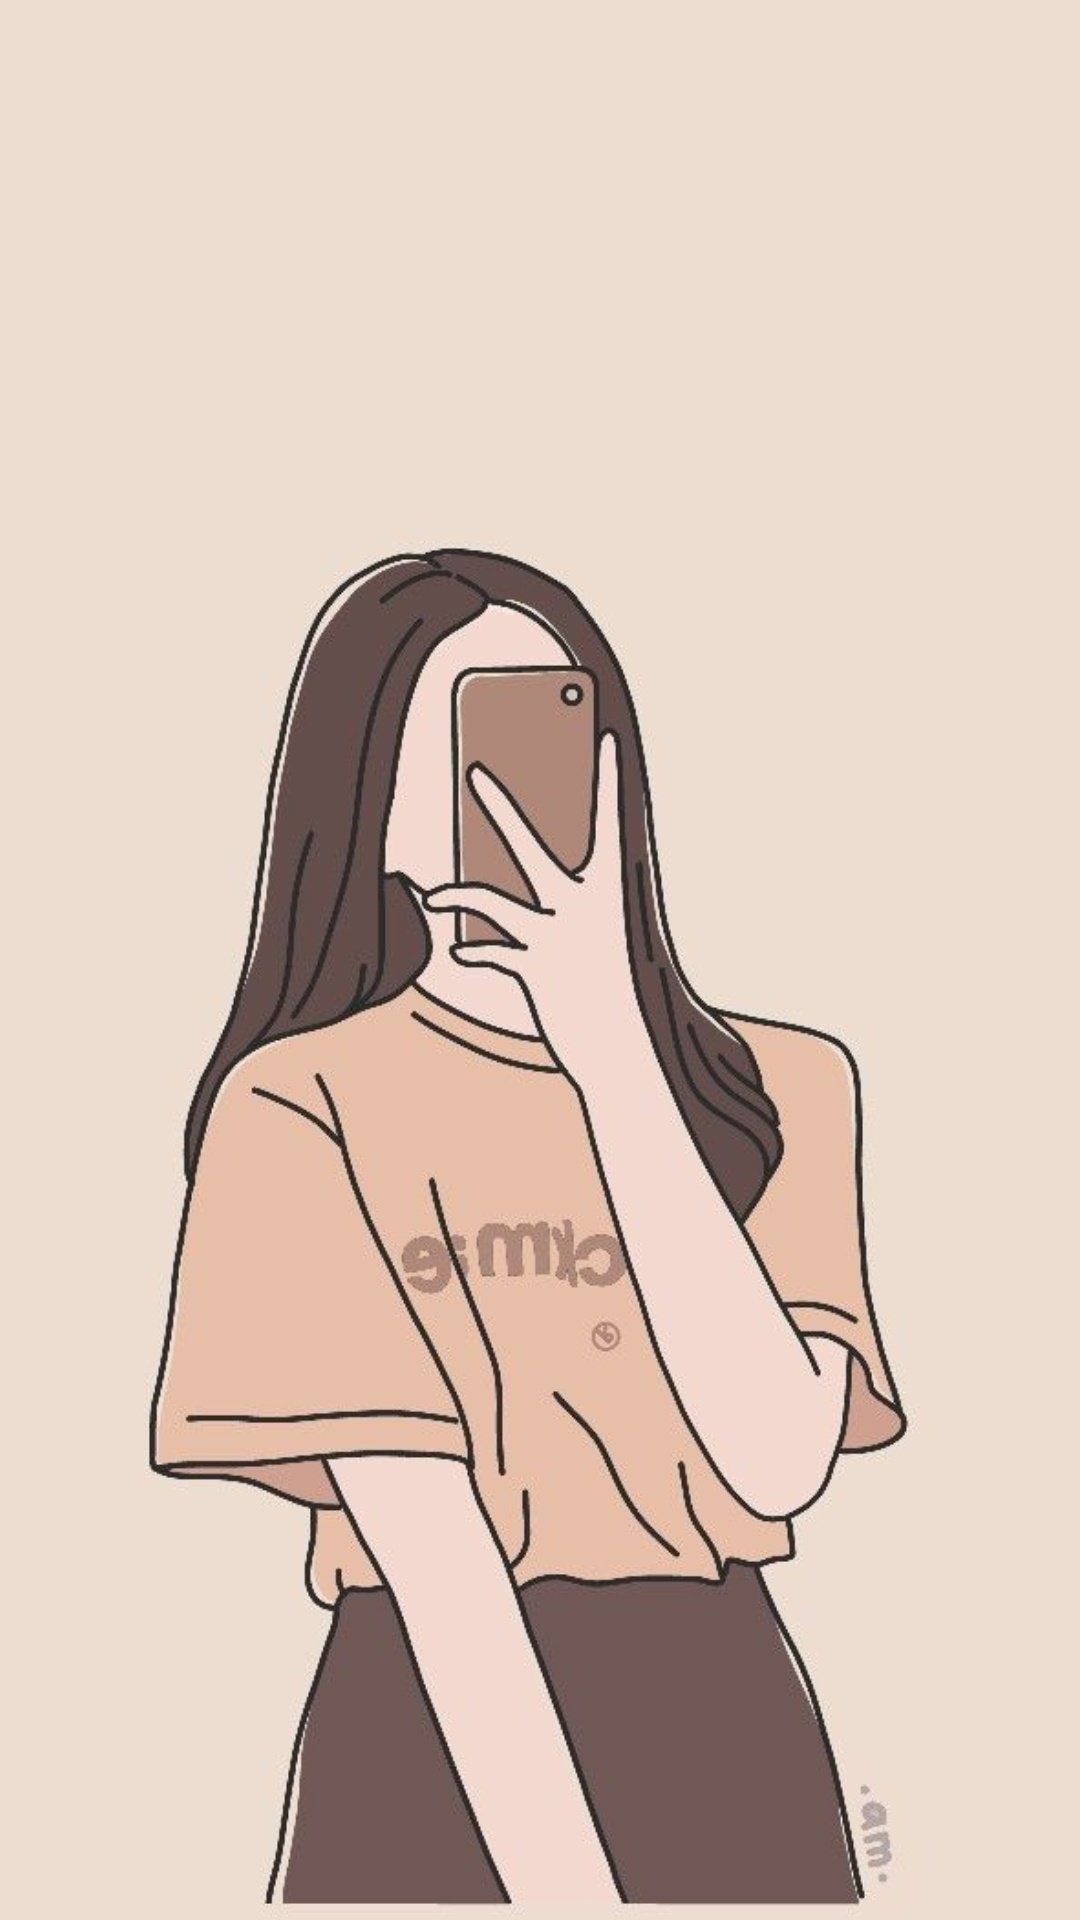 Drawing of a girl with brown hair holding a phone in front of her face aesthetic backgrounds - Cute